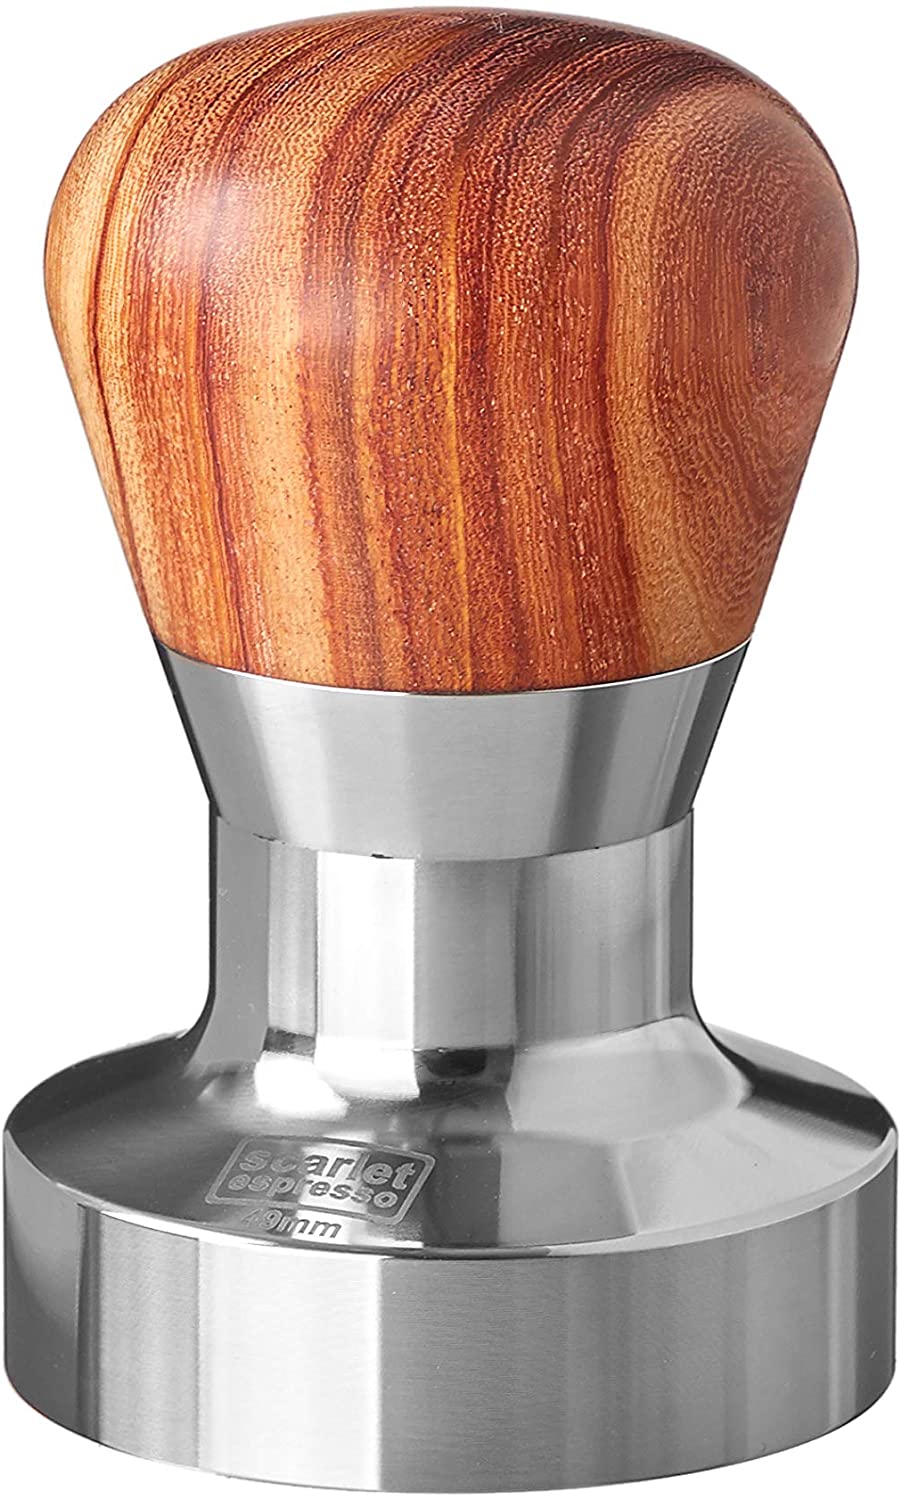 scarlet bijoux Scarlet Espresso Passion Tamper for Barista; with Ergonomic PVC or Precious Wood Handle of Choice and Precision Stainless Steel Base (49 mm)